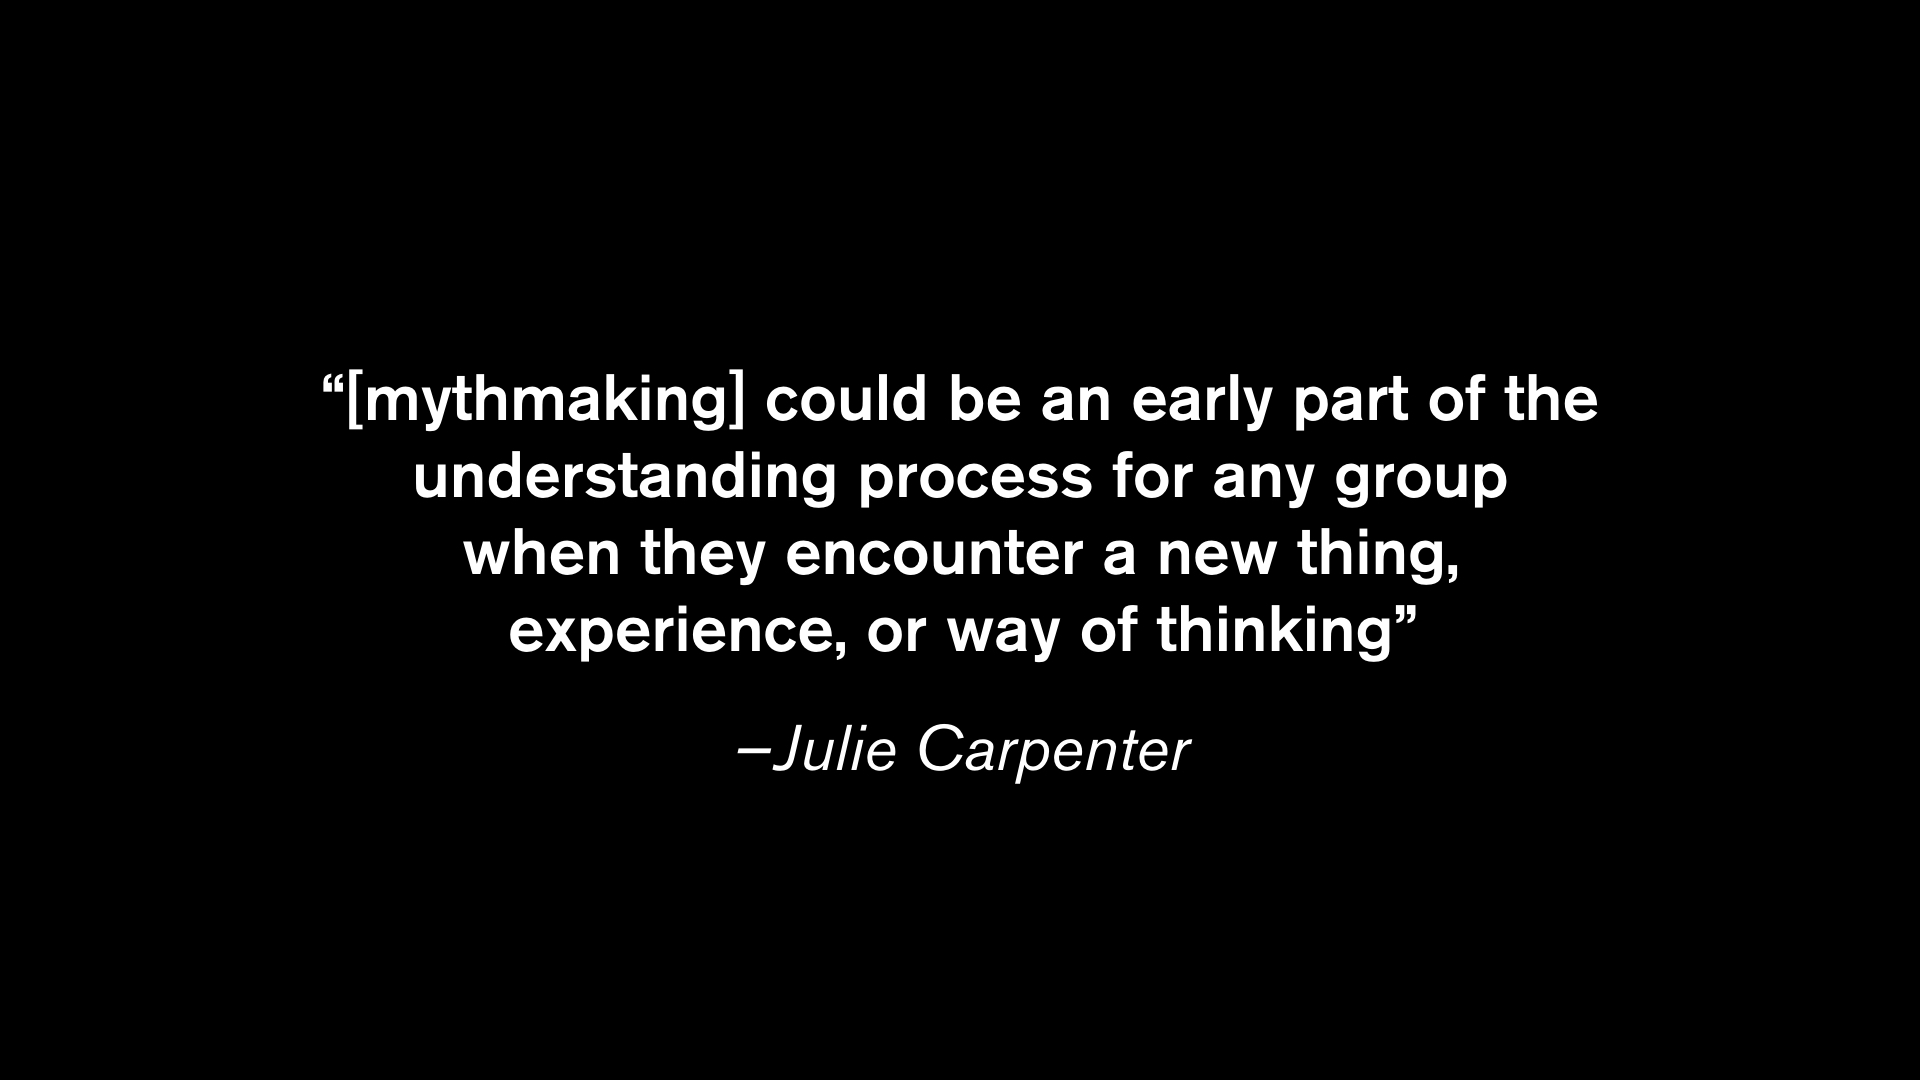 mythmaking could be an early part of the understanding process for any group when they encounter a new thing, experience, or way of thinking